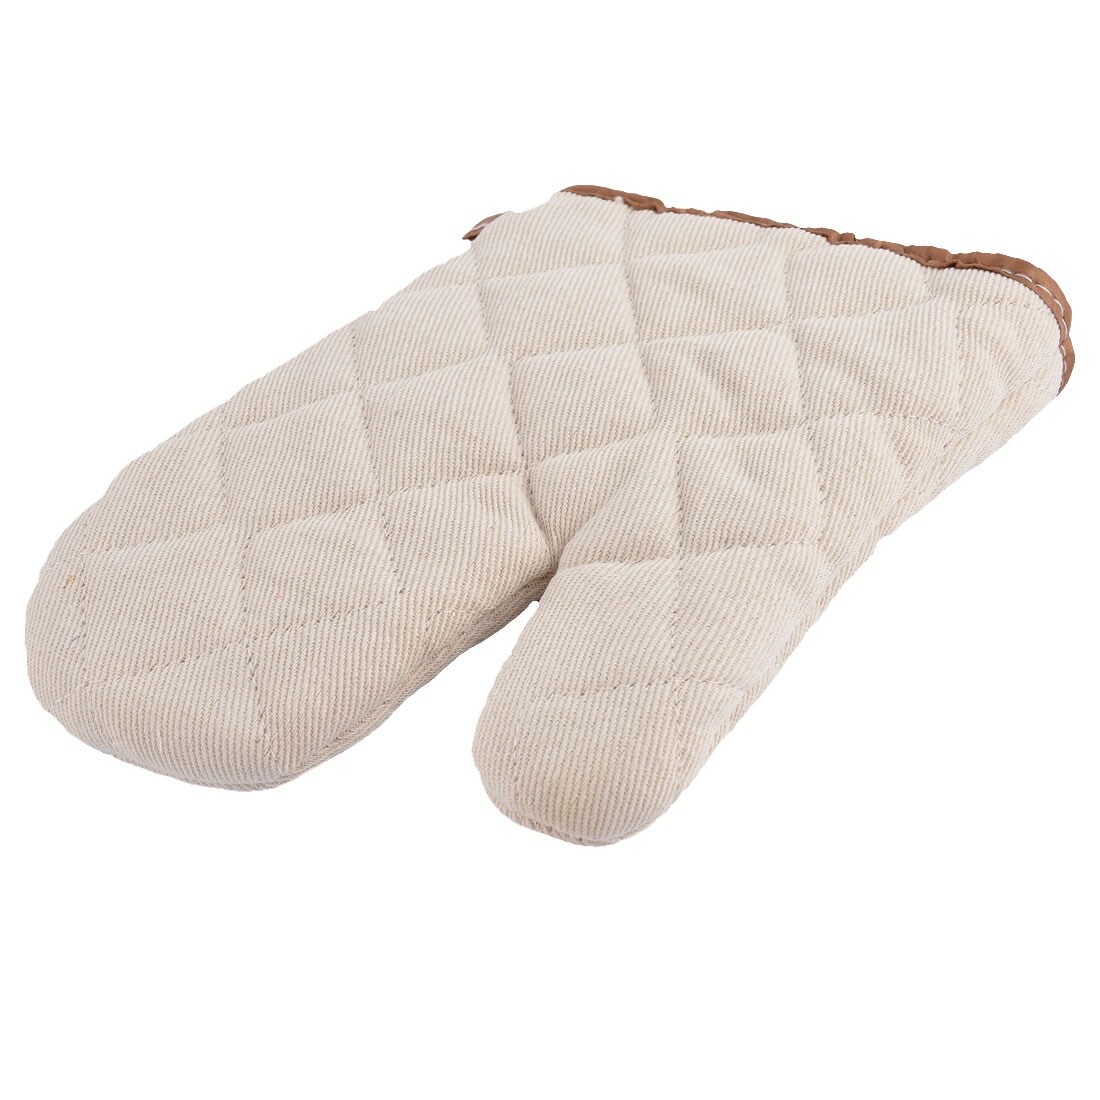 Bakery Heat Hot Resistance Microwave Barbeque Baking Oven Mitts Gloves -  13.7 x 5.9(L*W) - Bed Bath & Beyond - 17595329